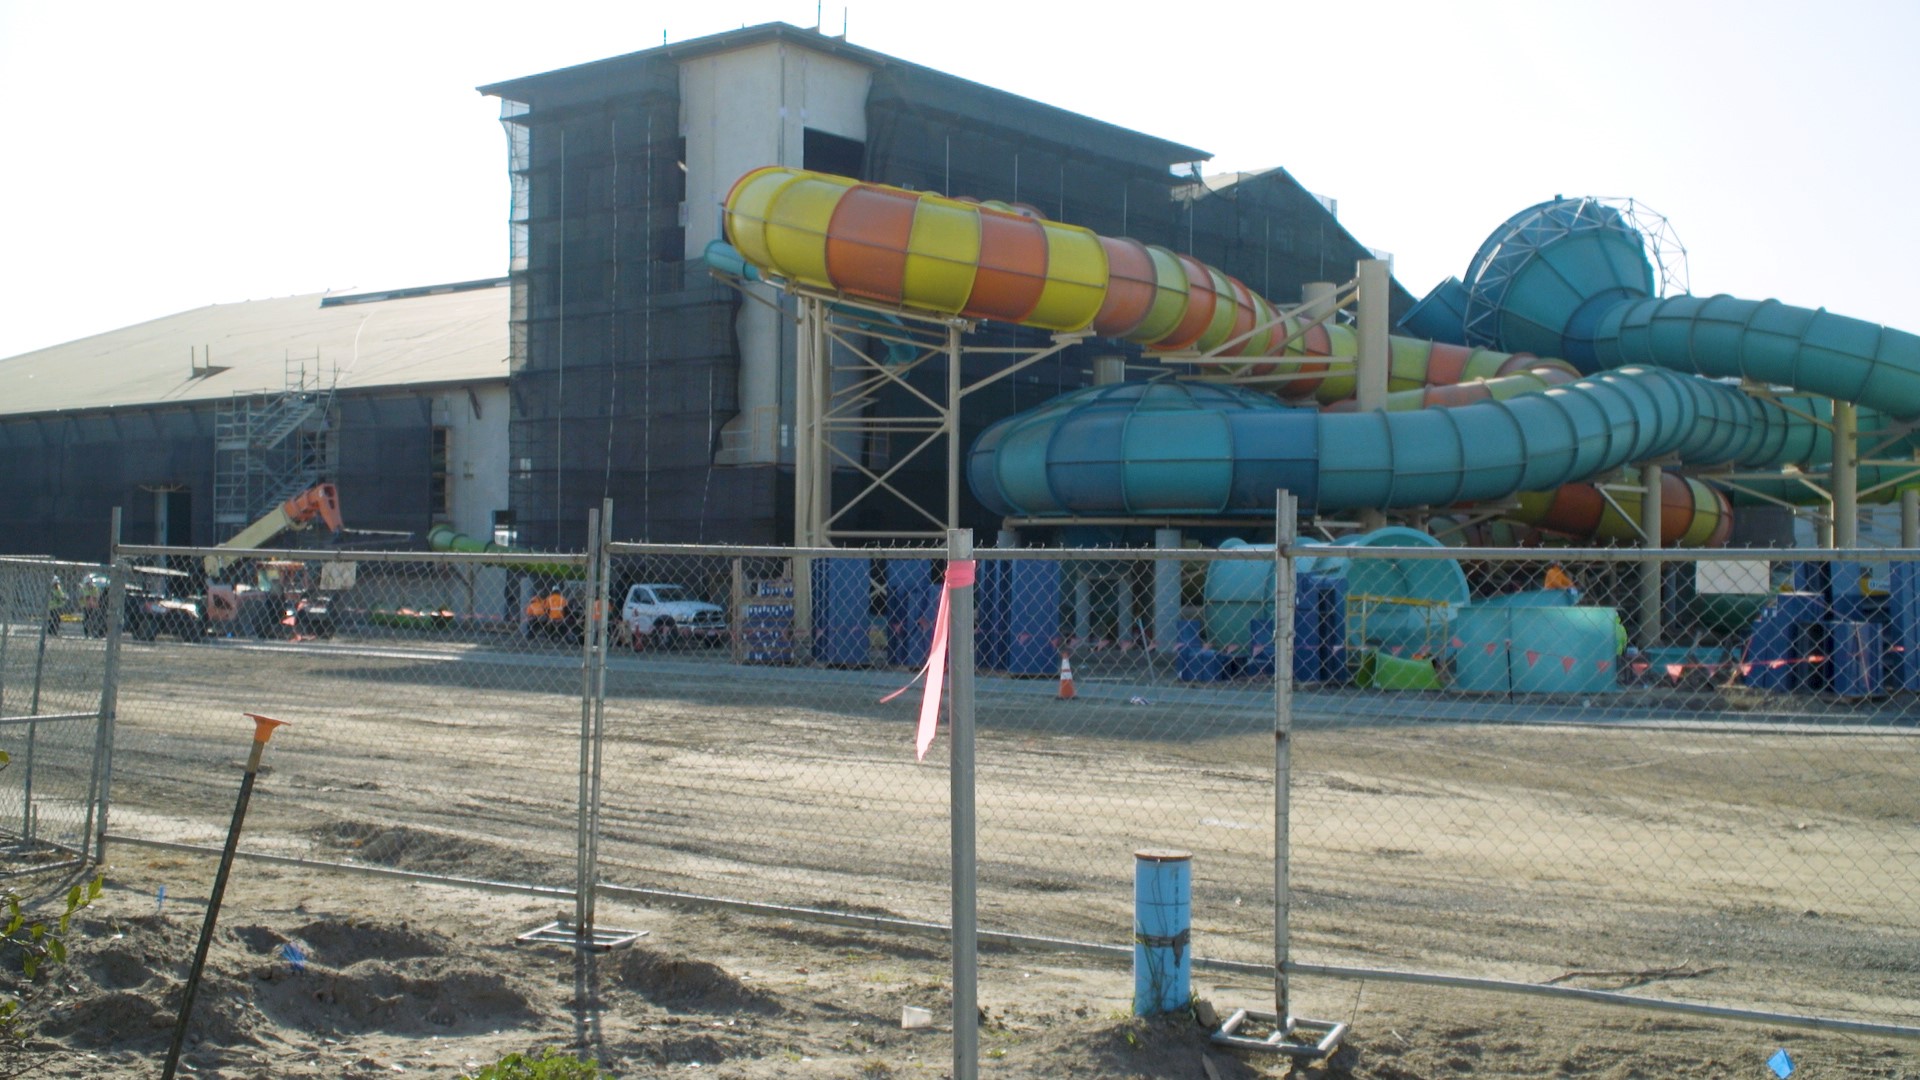 Water slides are going up at the site of the 'Great Wolf Lodge' in Manteca. The hotel and waterpark are currently under construction, scheduled to open in 2020.